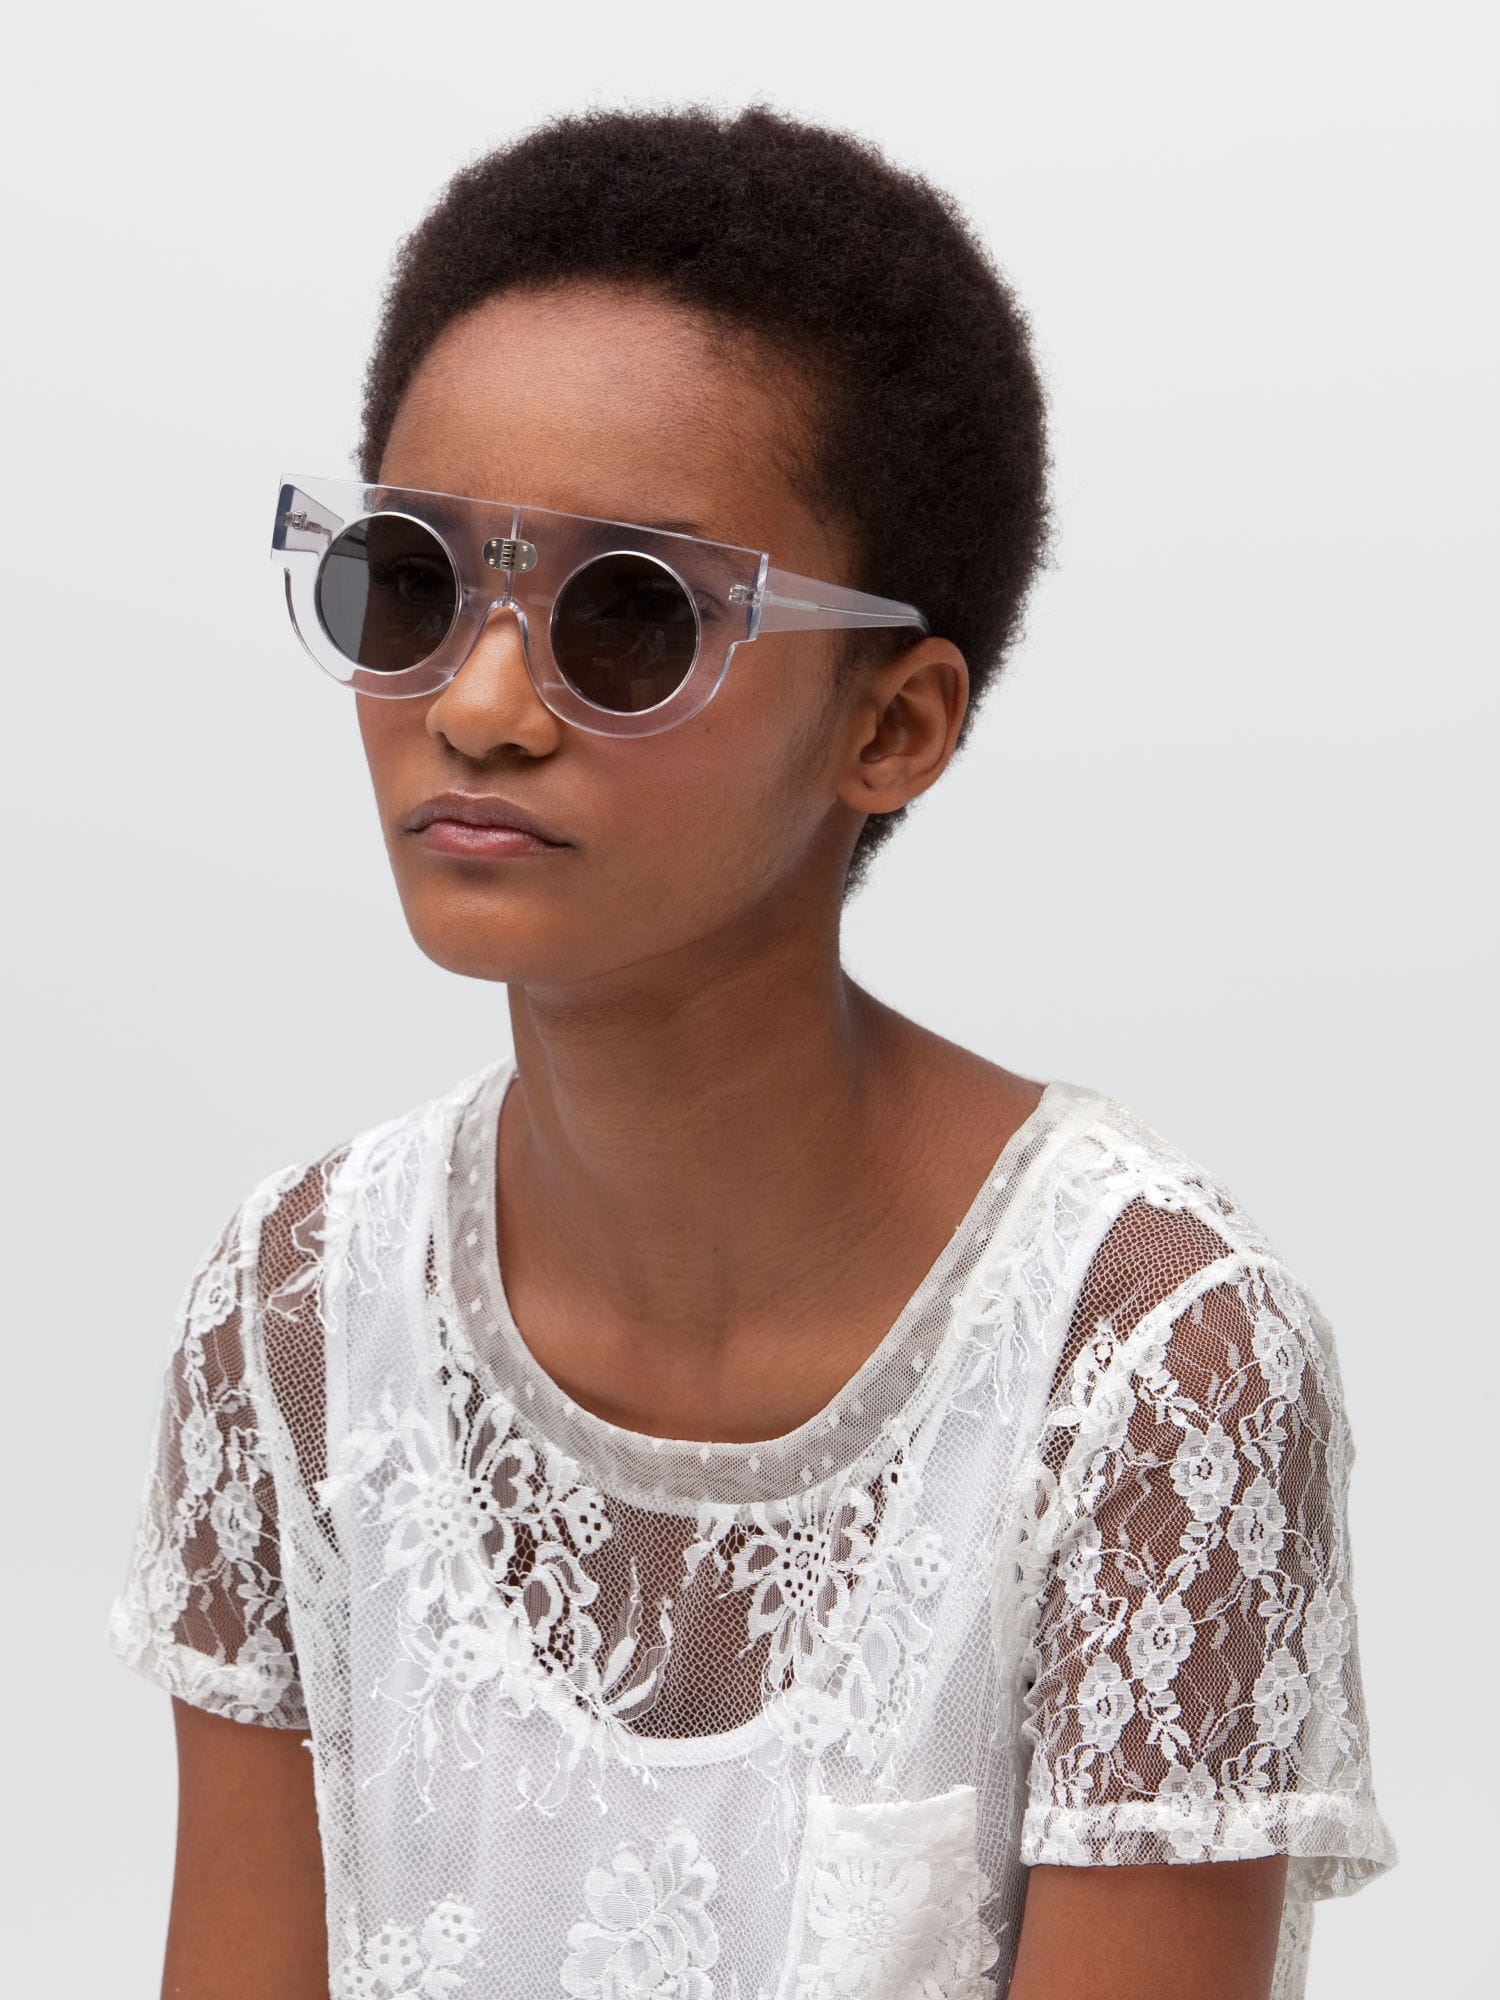 Woman wearing a see-through white lace top with white tanktop underneath and transparent-framed sunglasses with dark round lenses